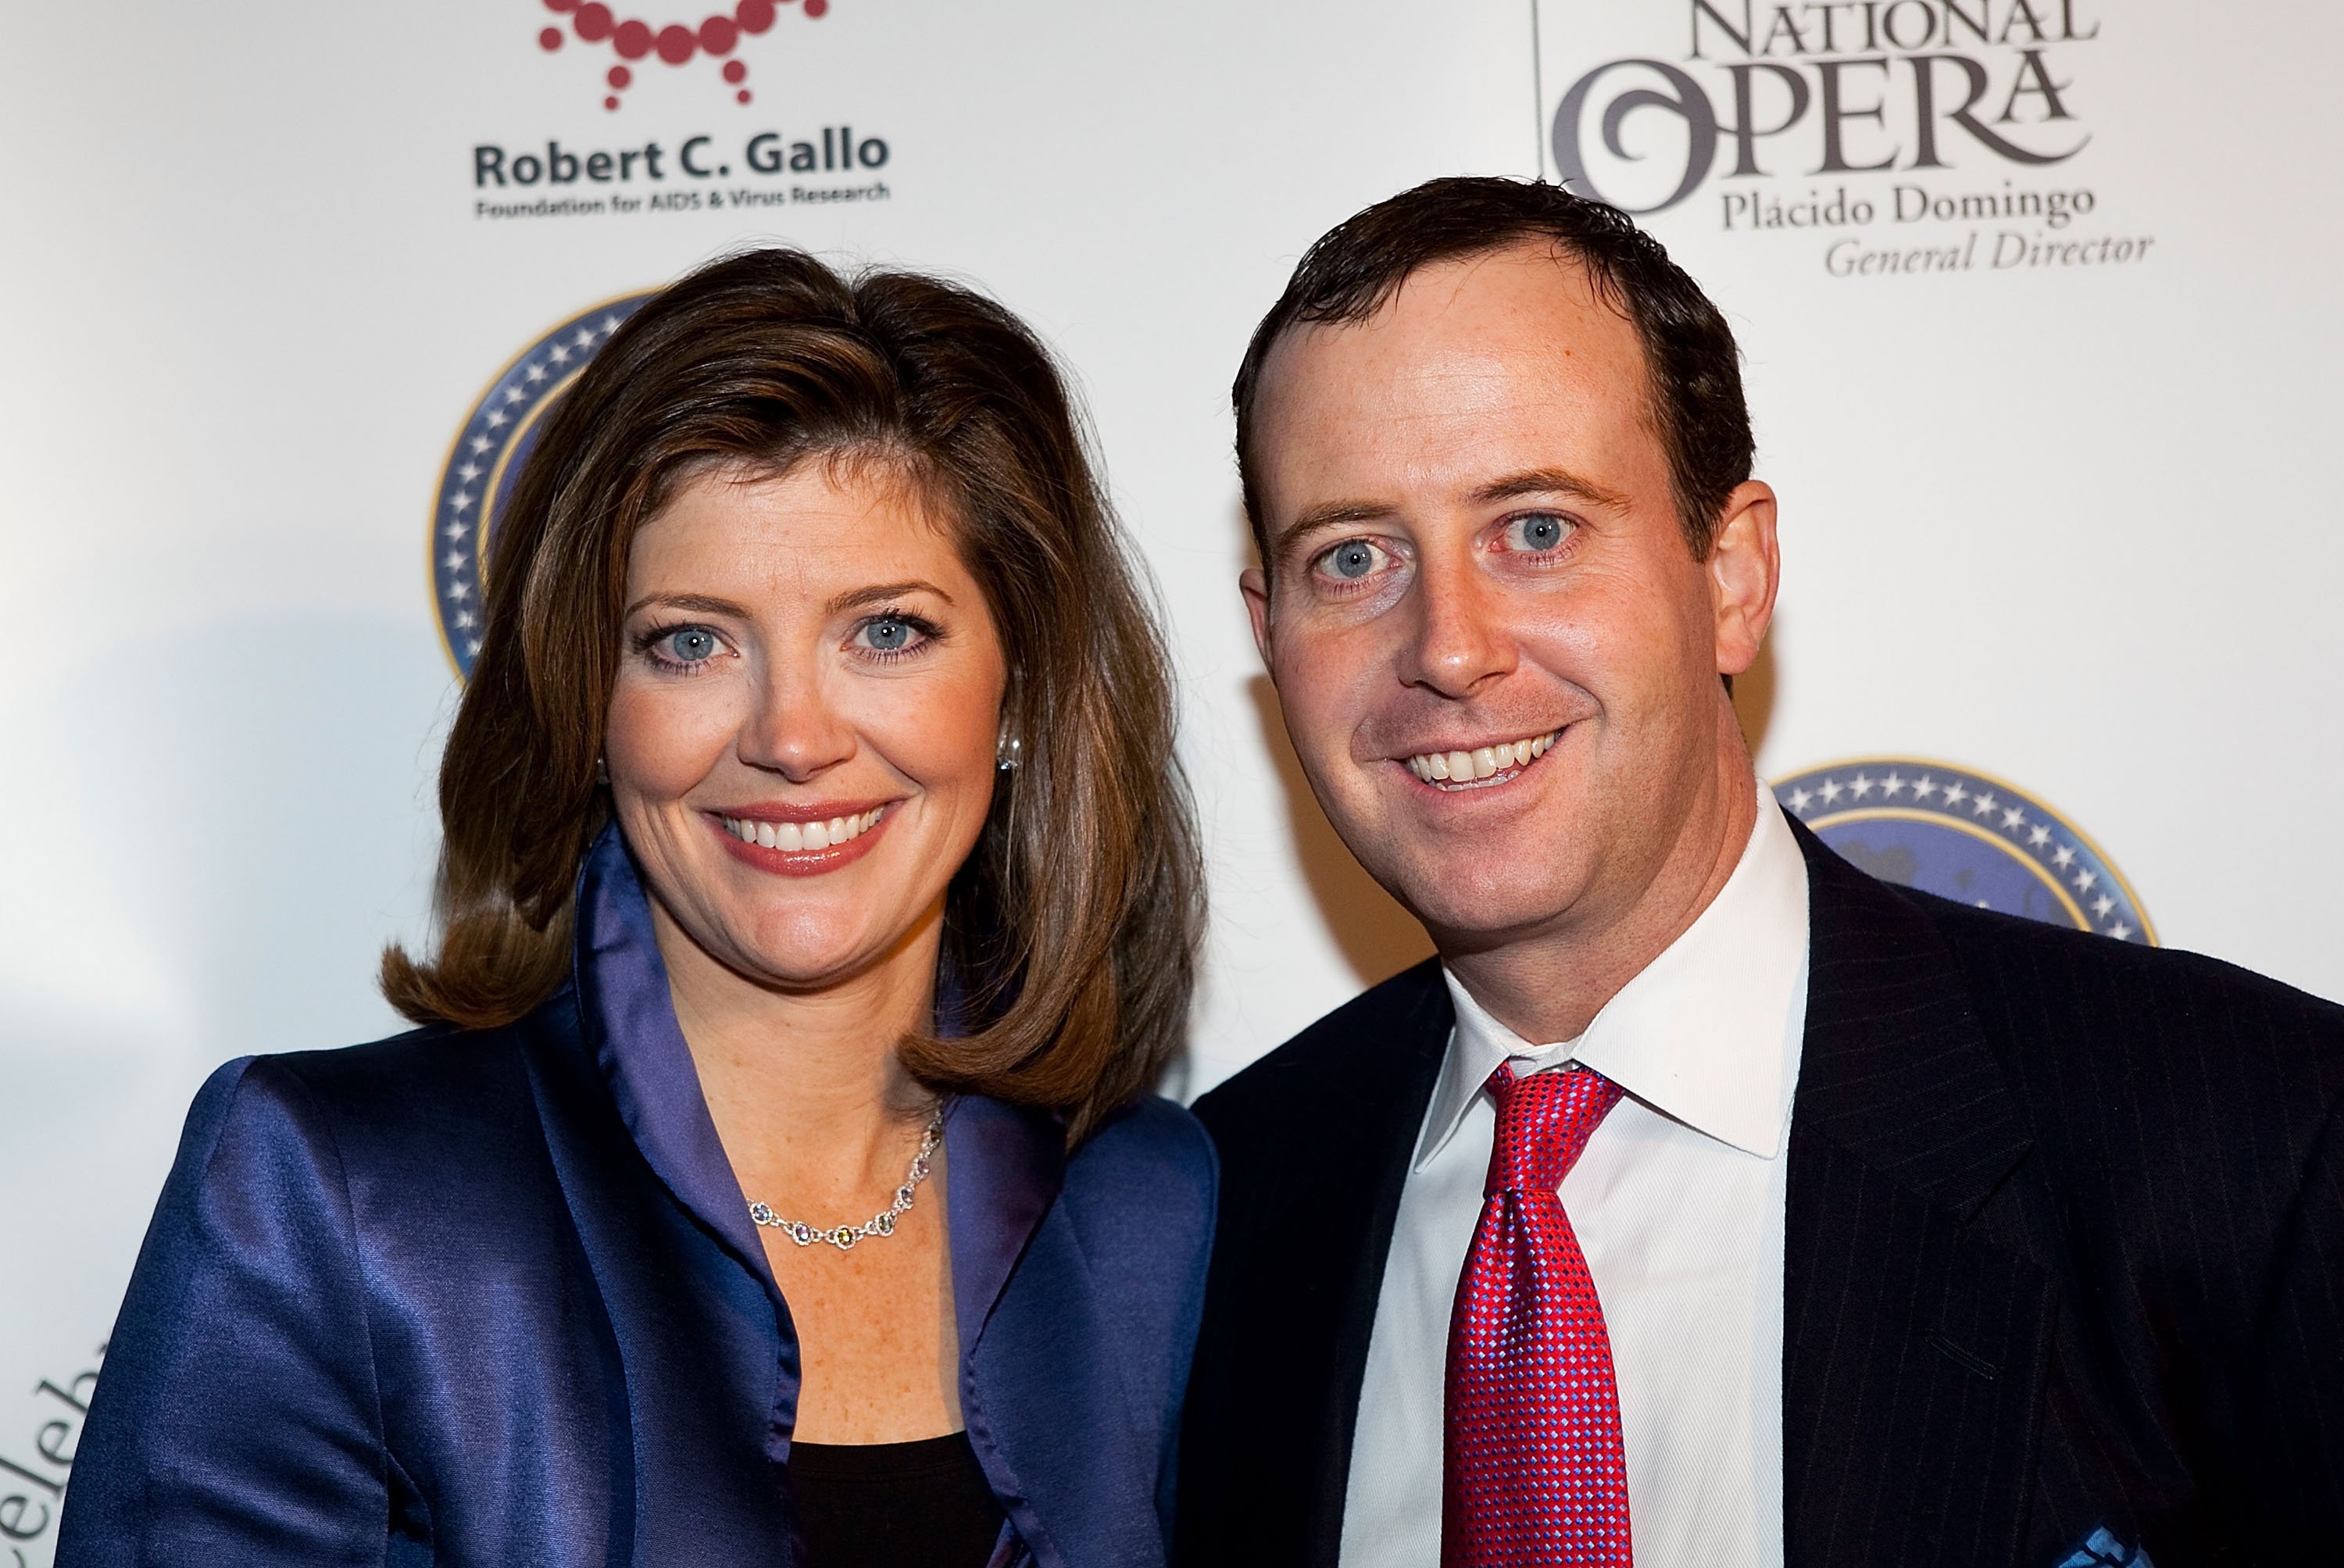 Norah O'Donnell and Geoff Tracy at the celebration to honor the Inauguration of Barack Obama at Cafe Milano on January 16, 2009 in Washington, DC | Photo: Getty Images